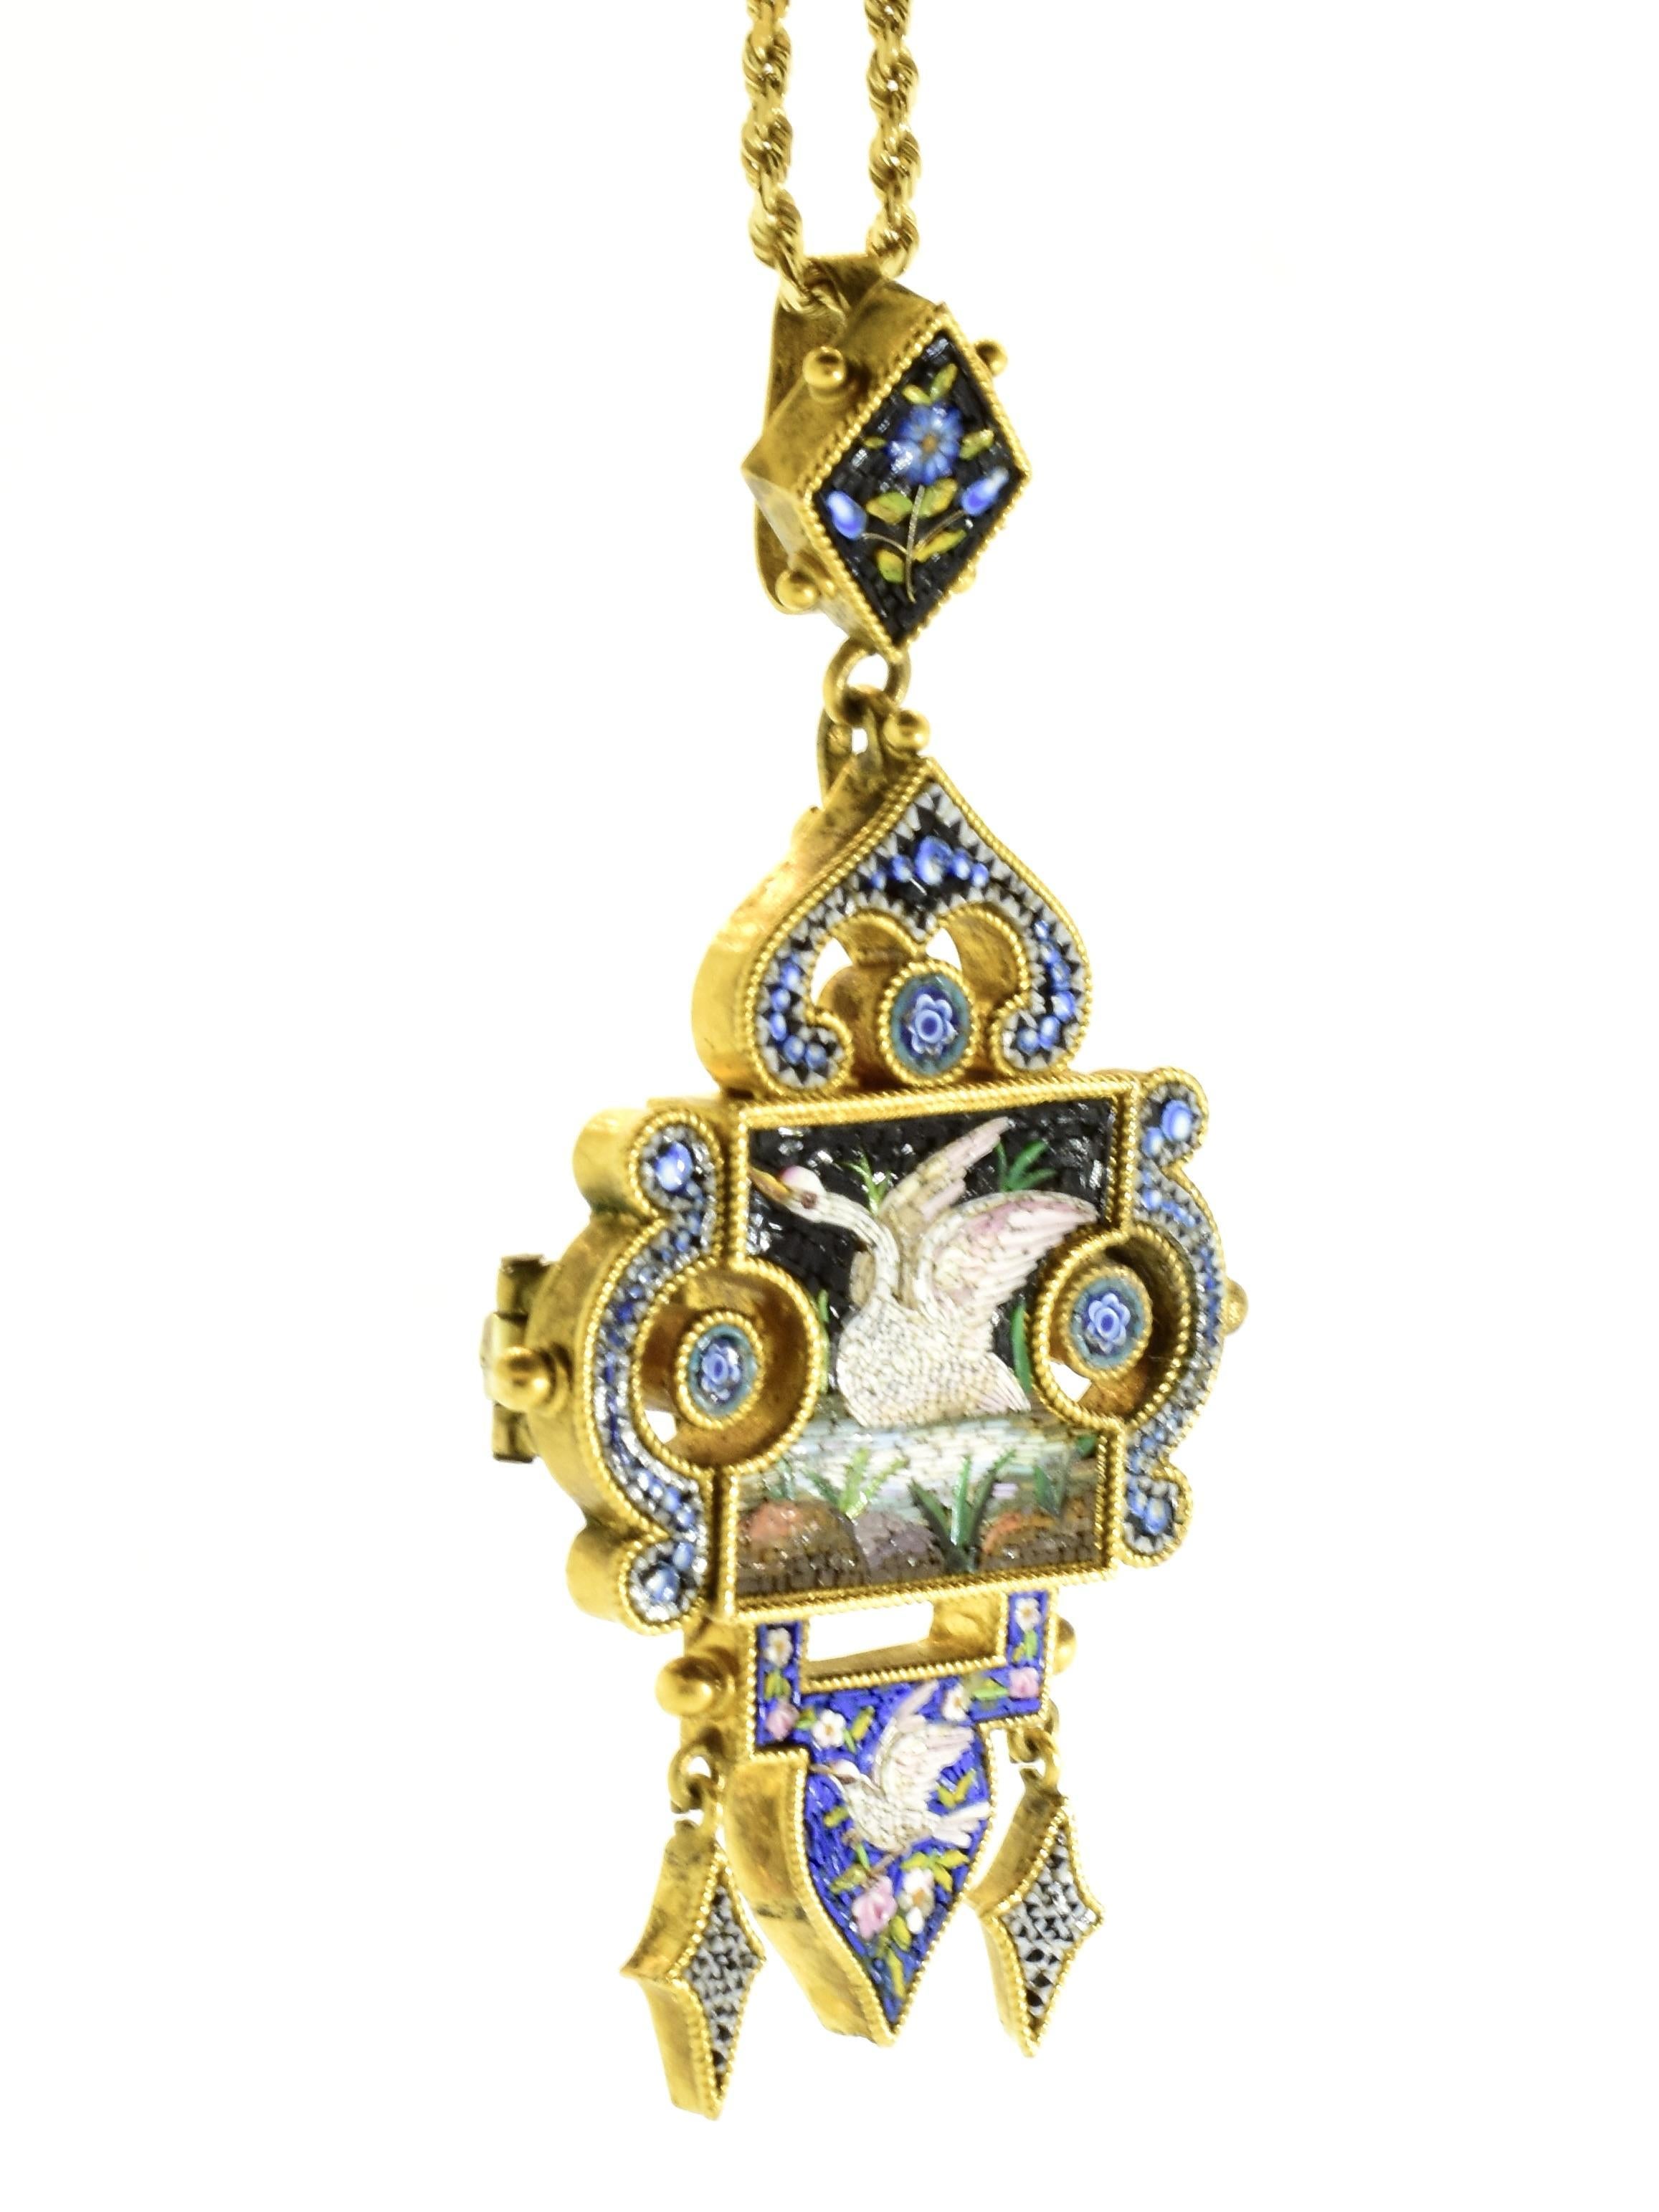 Antique Micro Mosaic 18K Pendant and Brooch, c. 1880 For Sale 1